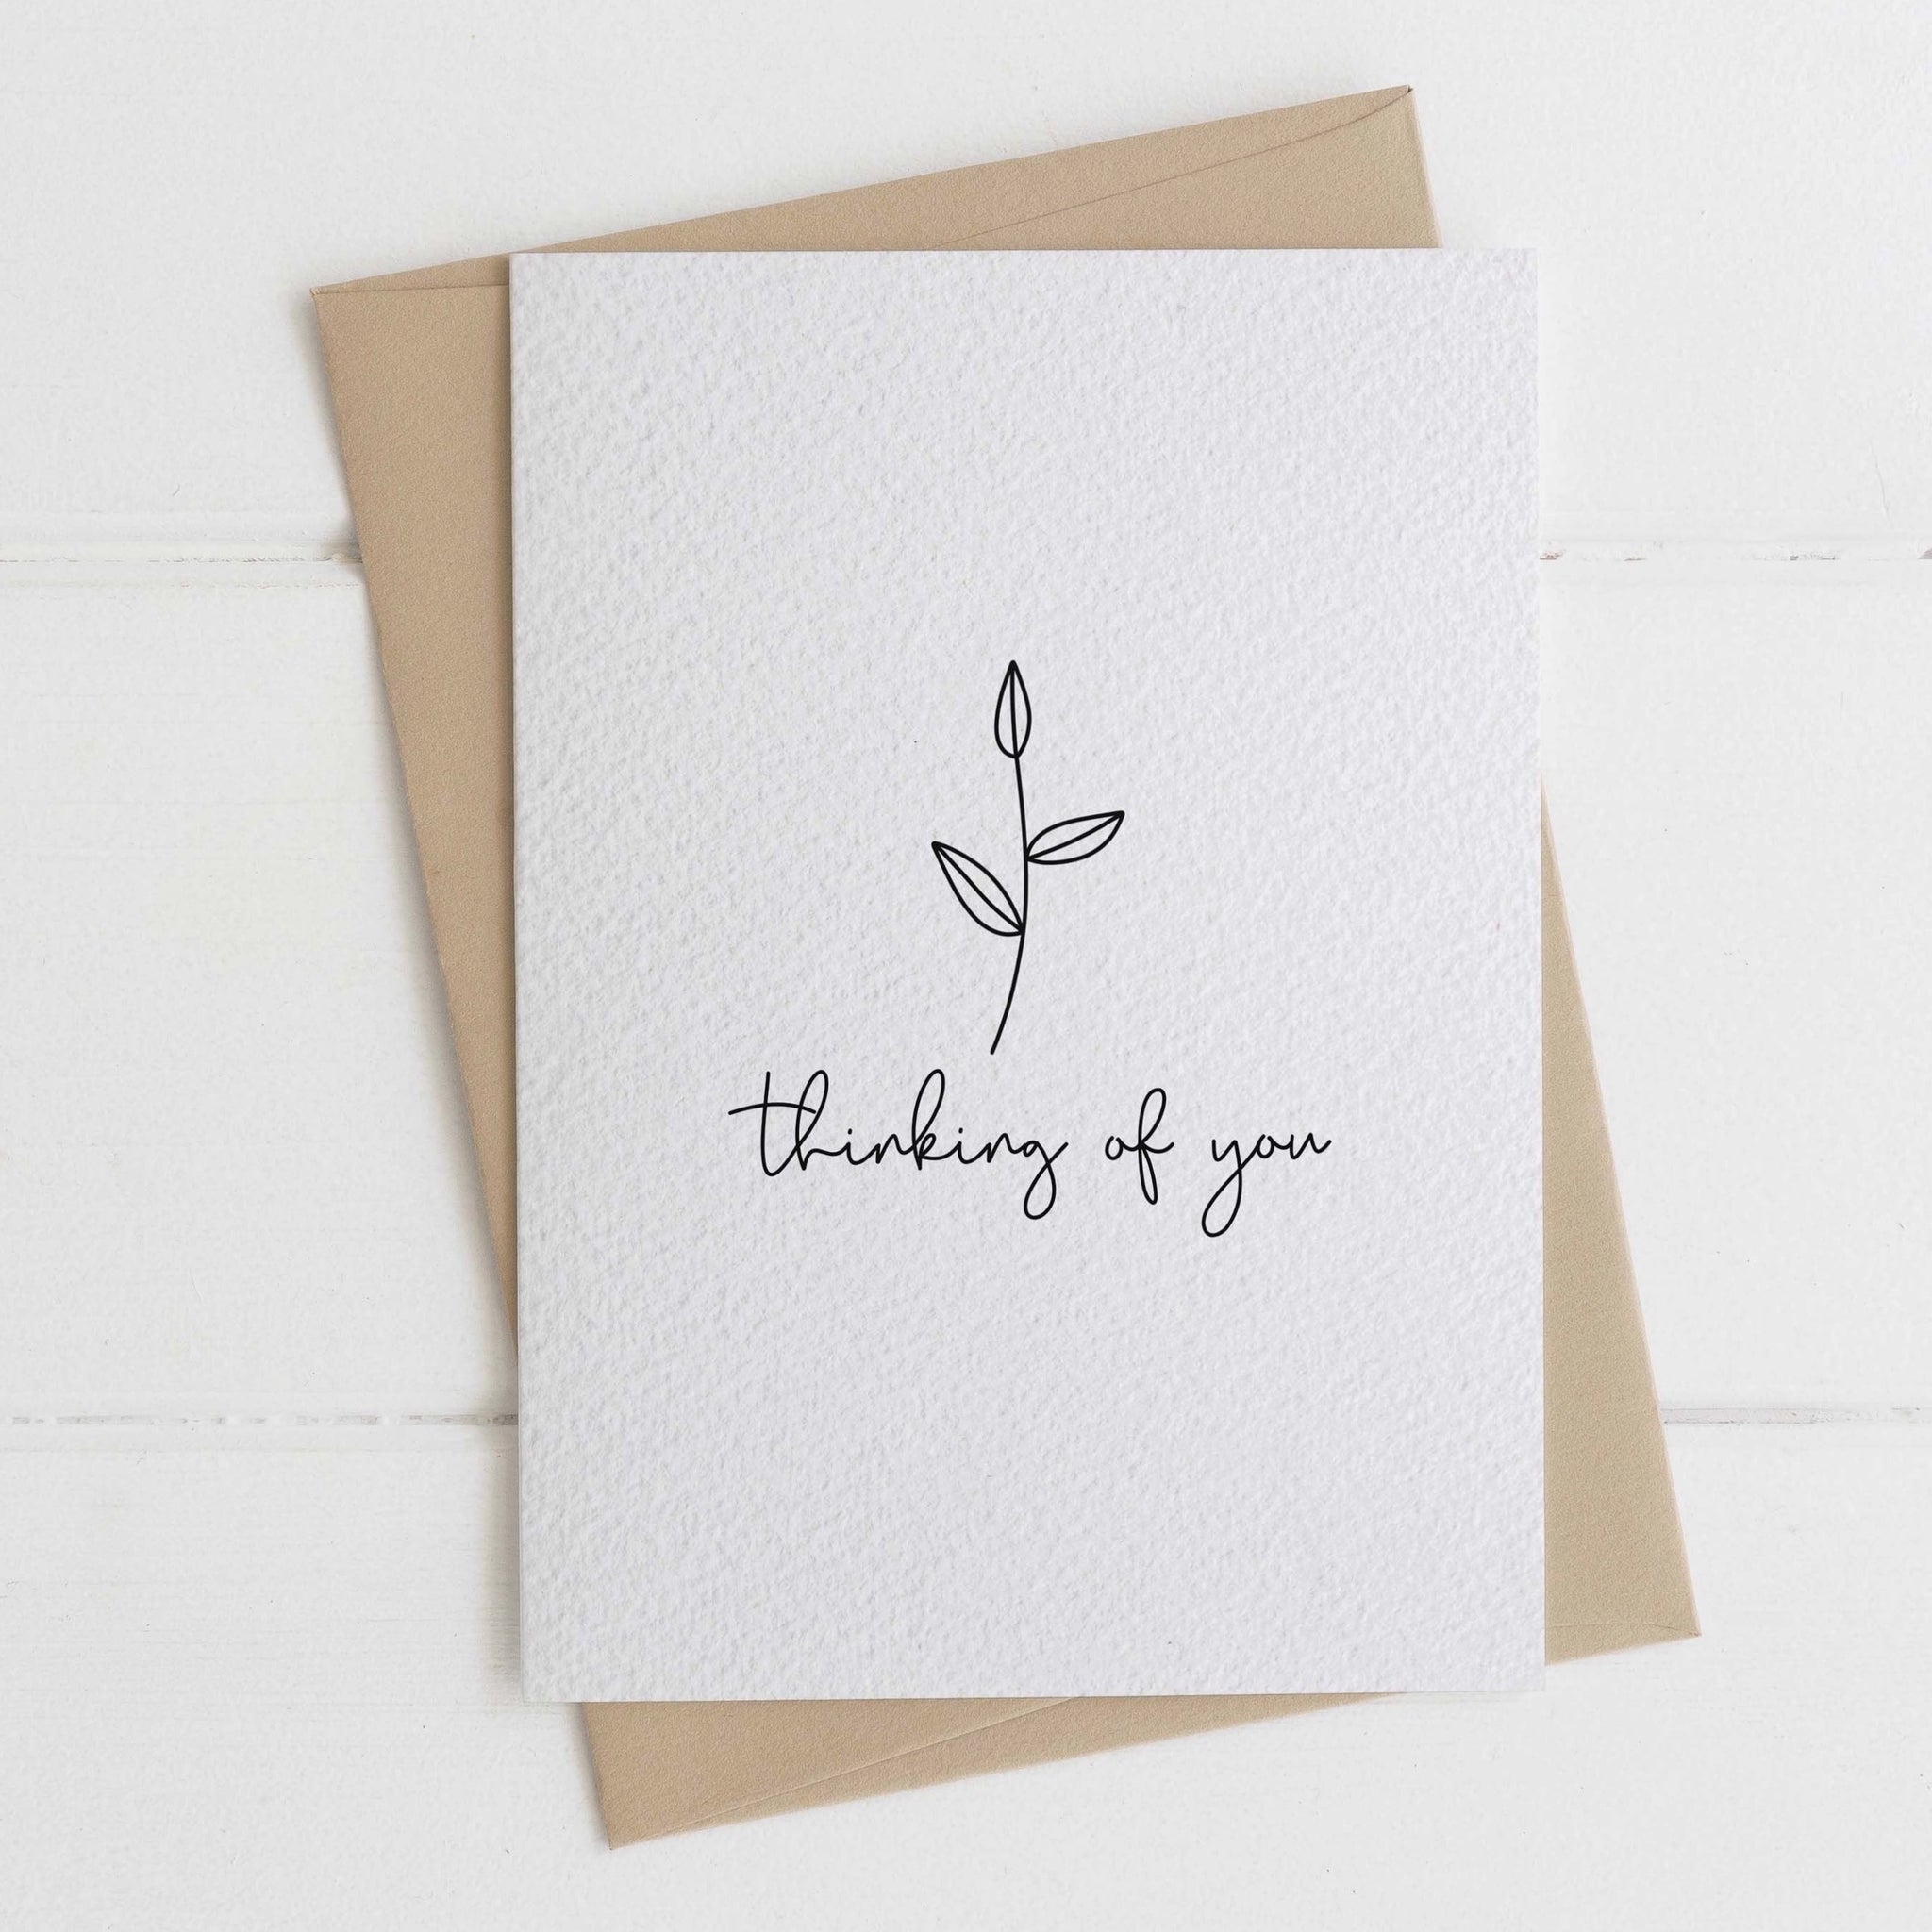 Thinking of you card - monochrome